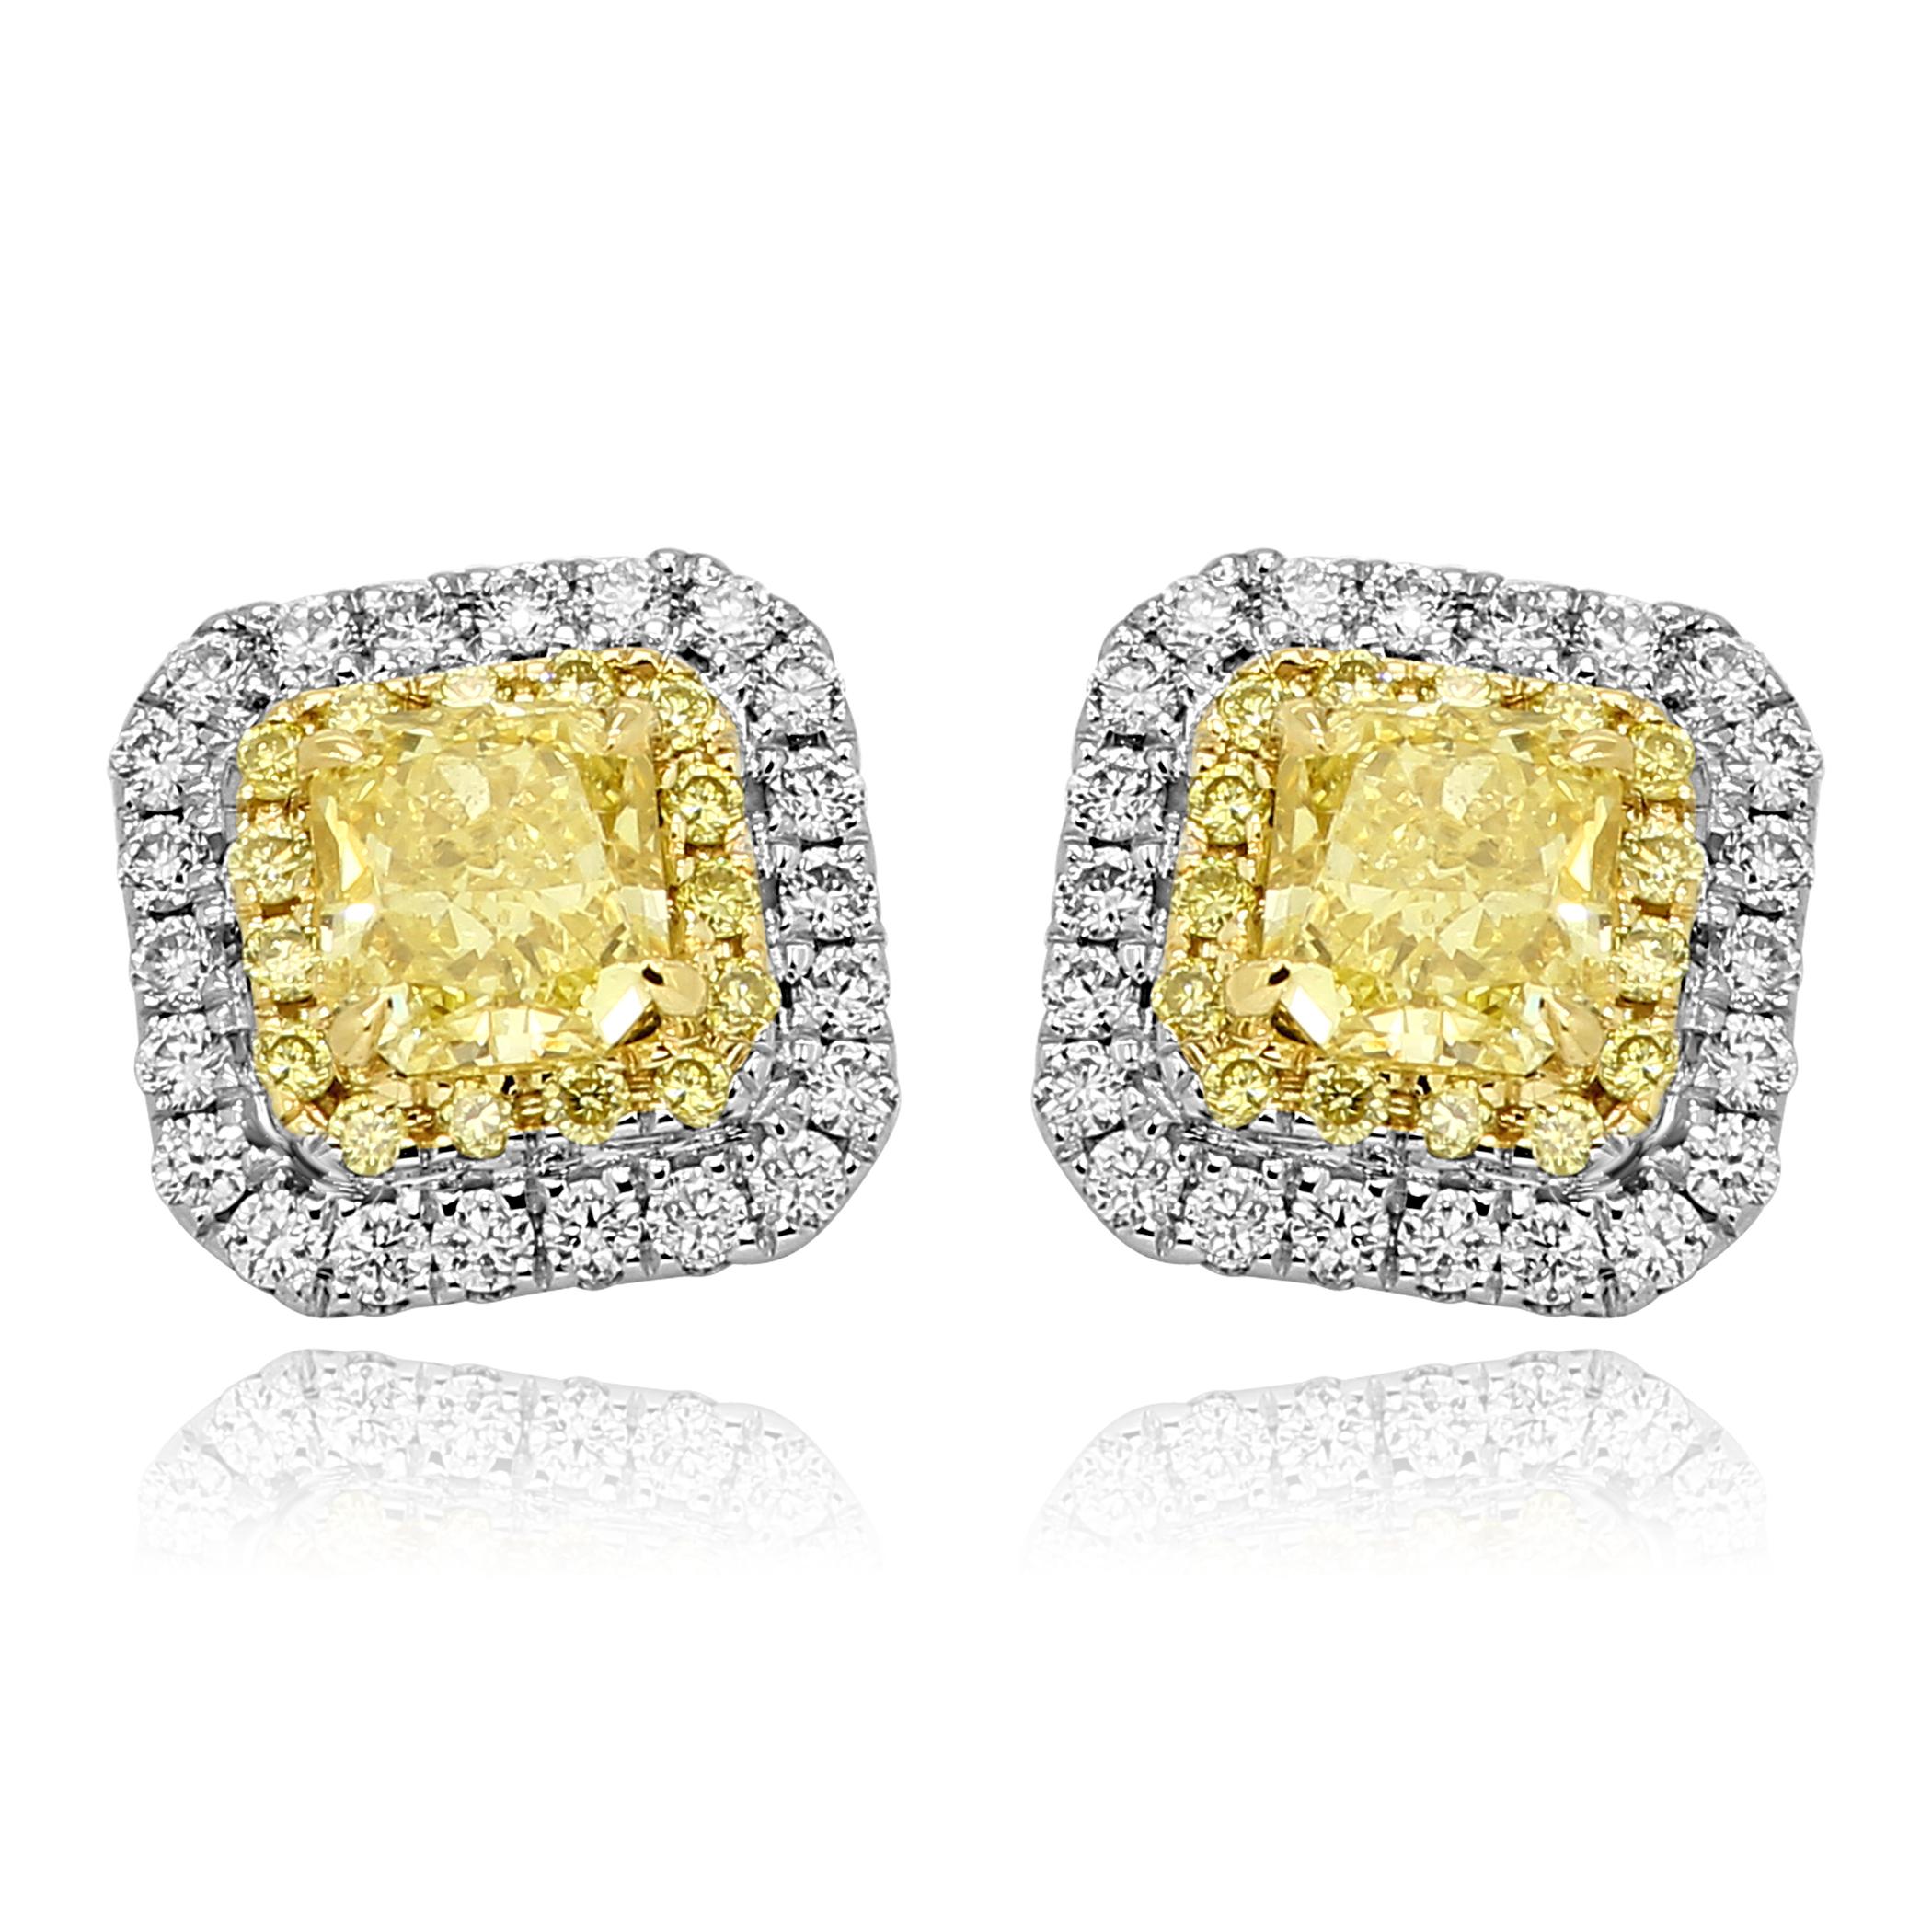 2 Natural Fancy Yellow Radiant Cut Diamonds 0.90 Carat Encircled in Double Halo Of 30 Natural Fancy Yellow Round Brilliant Diamonds 0.13 Carat and 44 White Round Brilliant Cut Diamonds 0.25 Carat in Gorgeous everyday wear 14K White and Yellow Gold